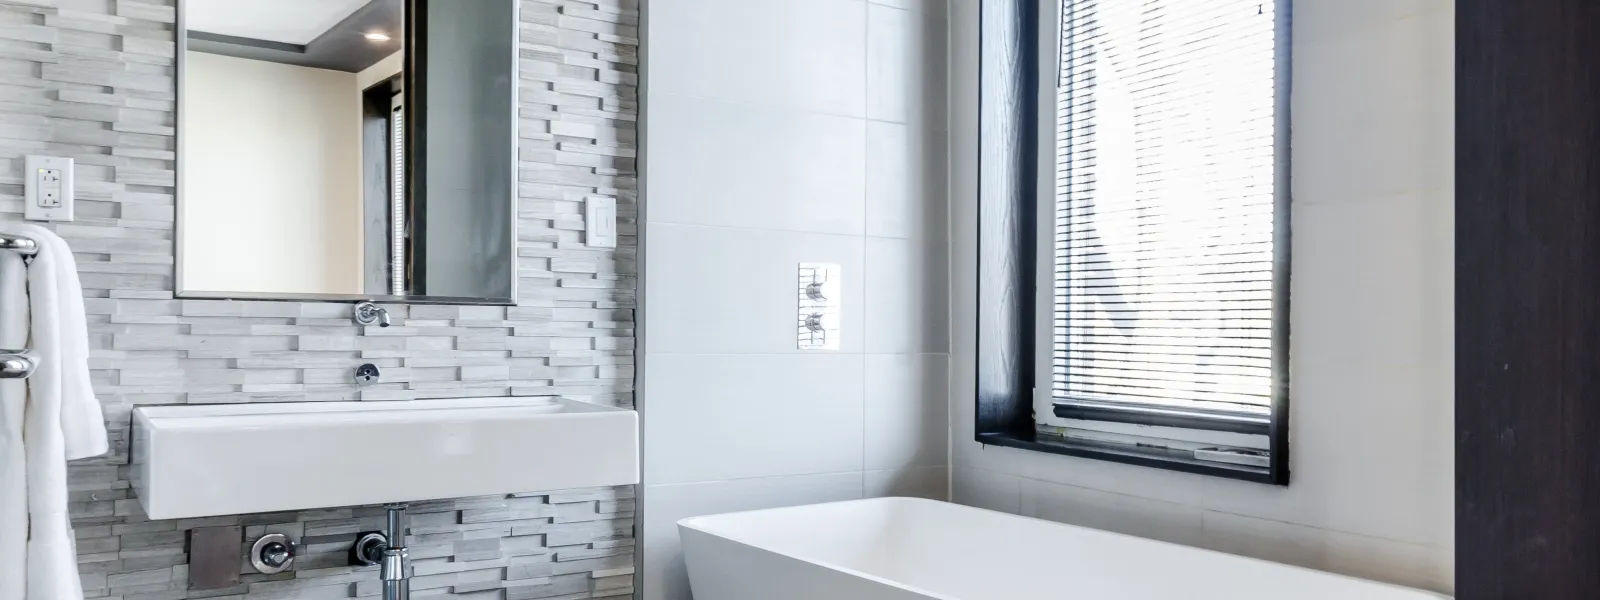 Do It Yourself vs. Professional Bathroom Remodeling